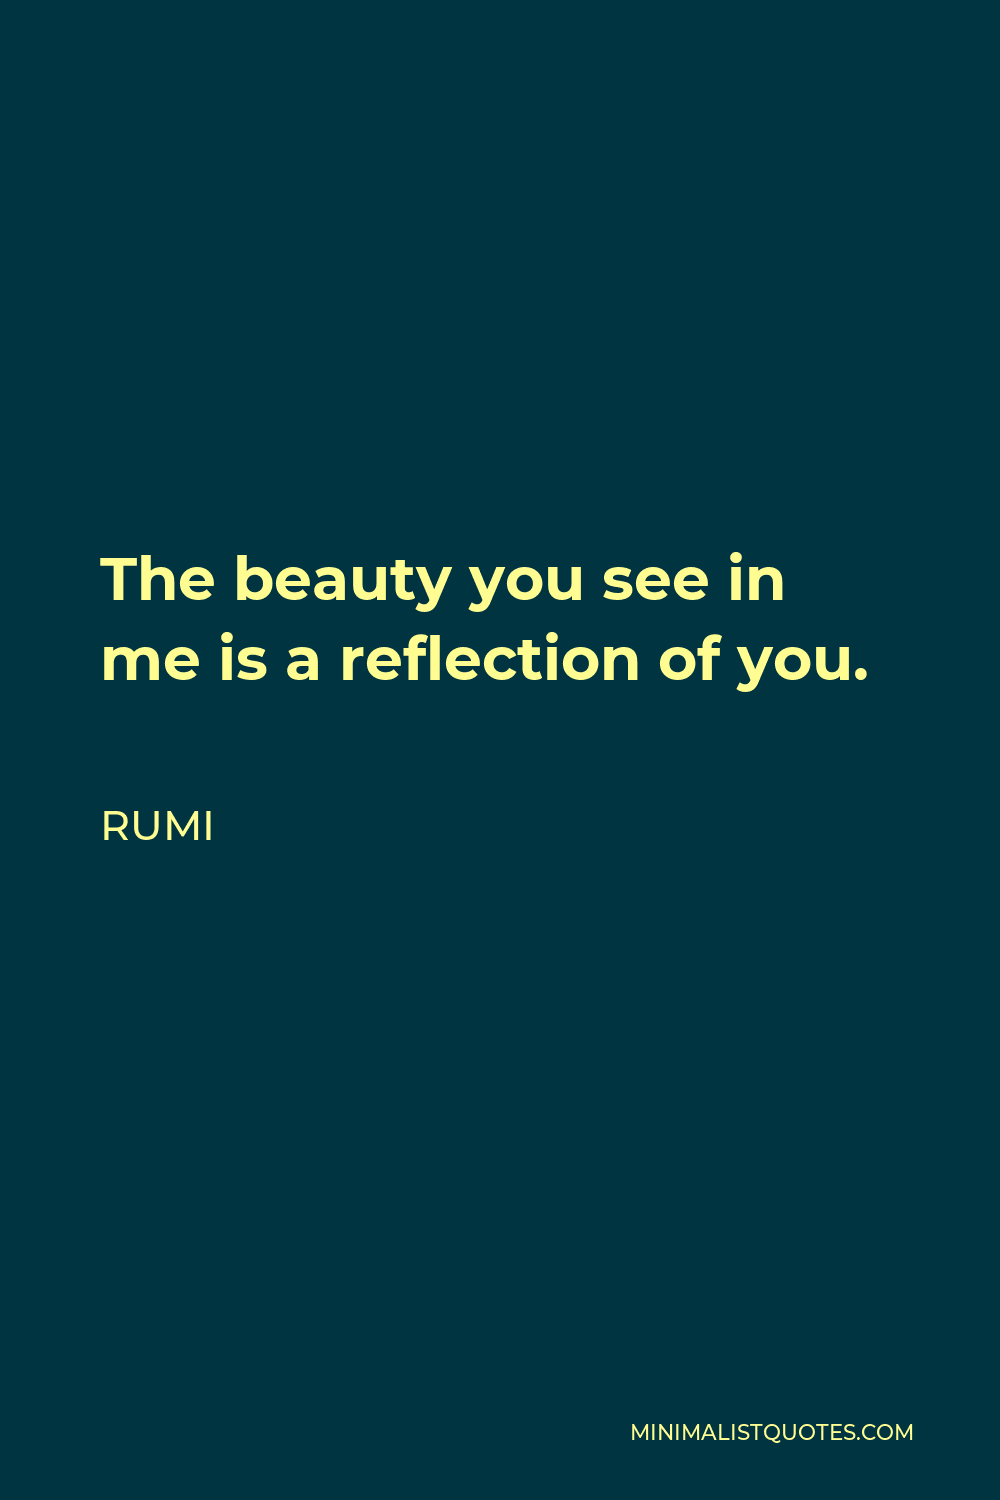 Rumi Quote - The beauty you see in me is a reflection of you.